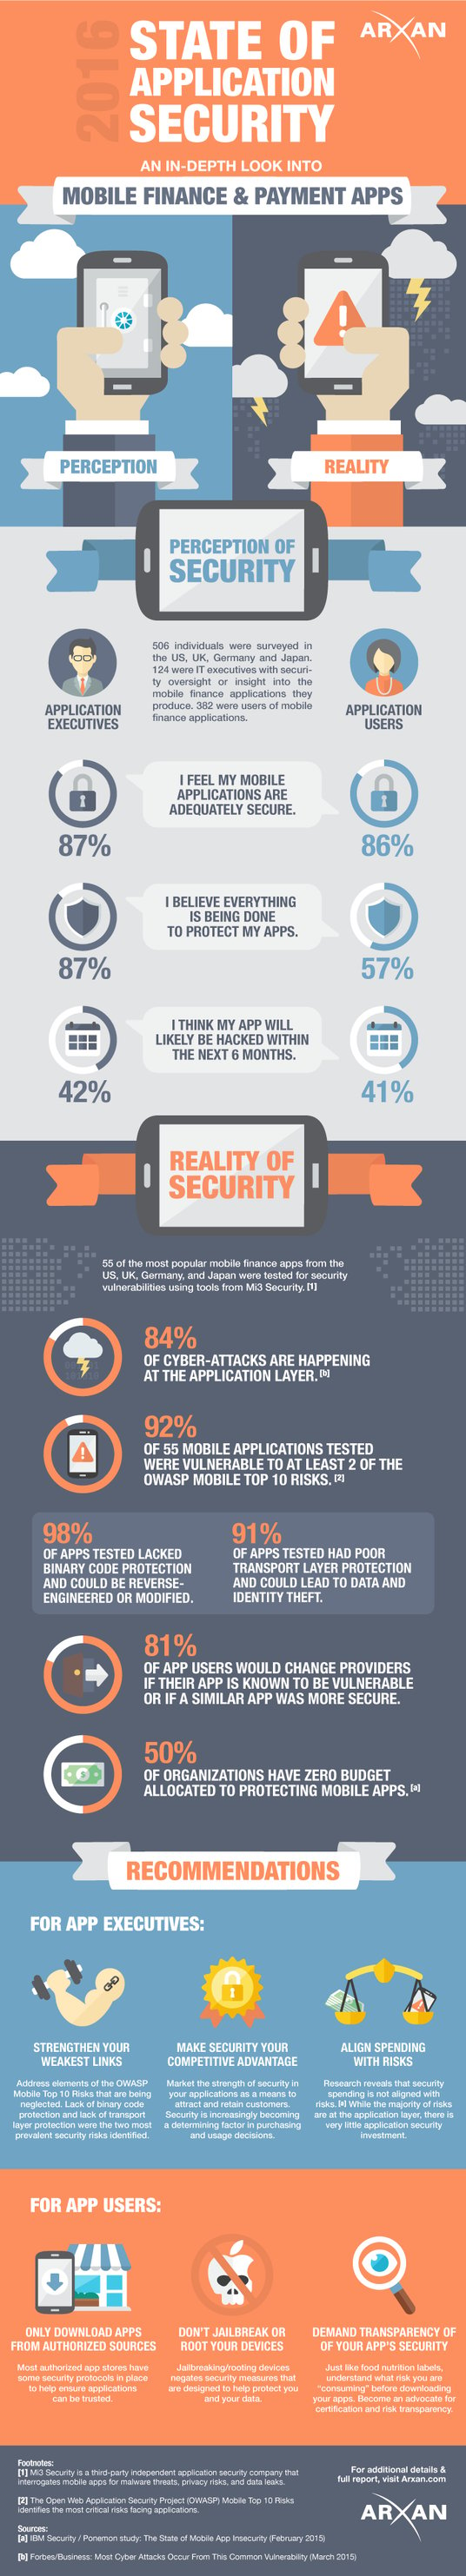 INFOGRAPHIC: THE STATE OF APPLICATION SECURITY OF MOBILE FINANCE AND SECURITY APPS